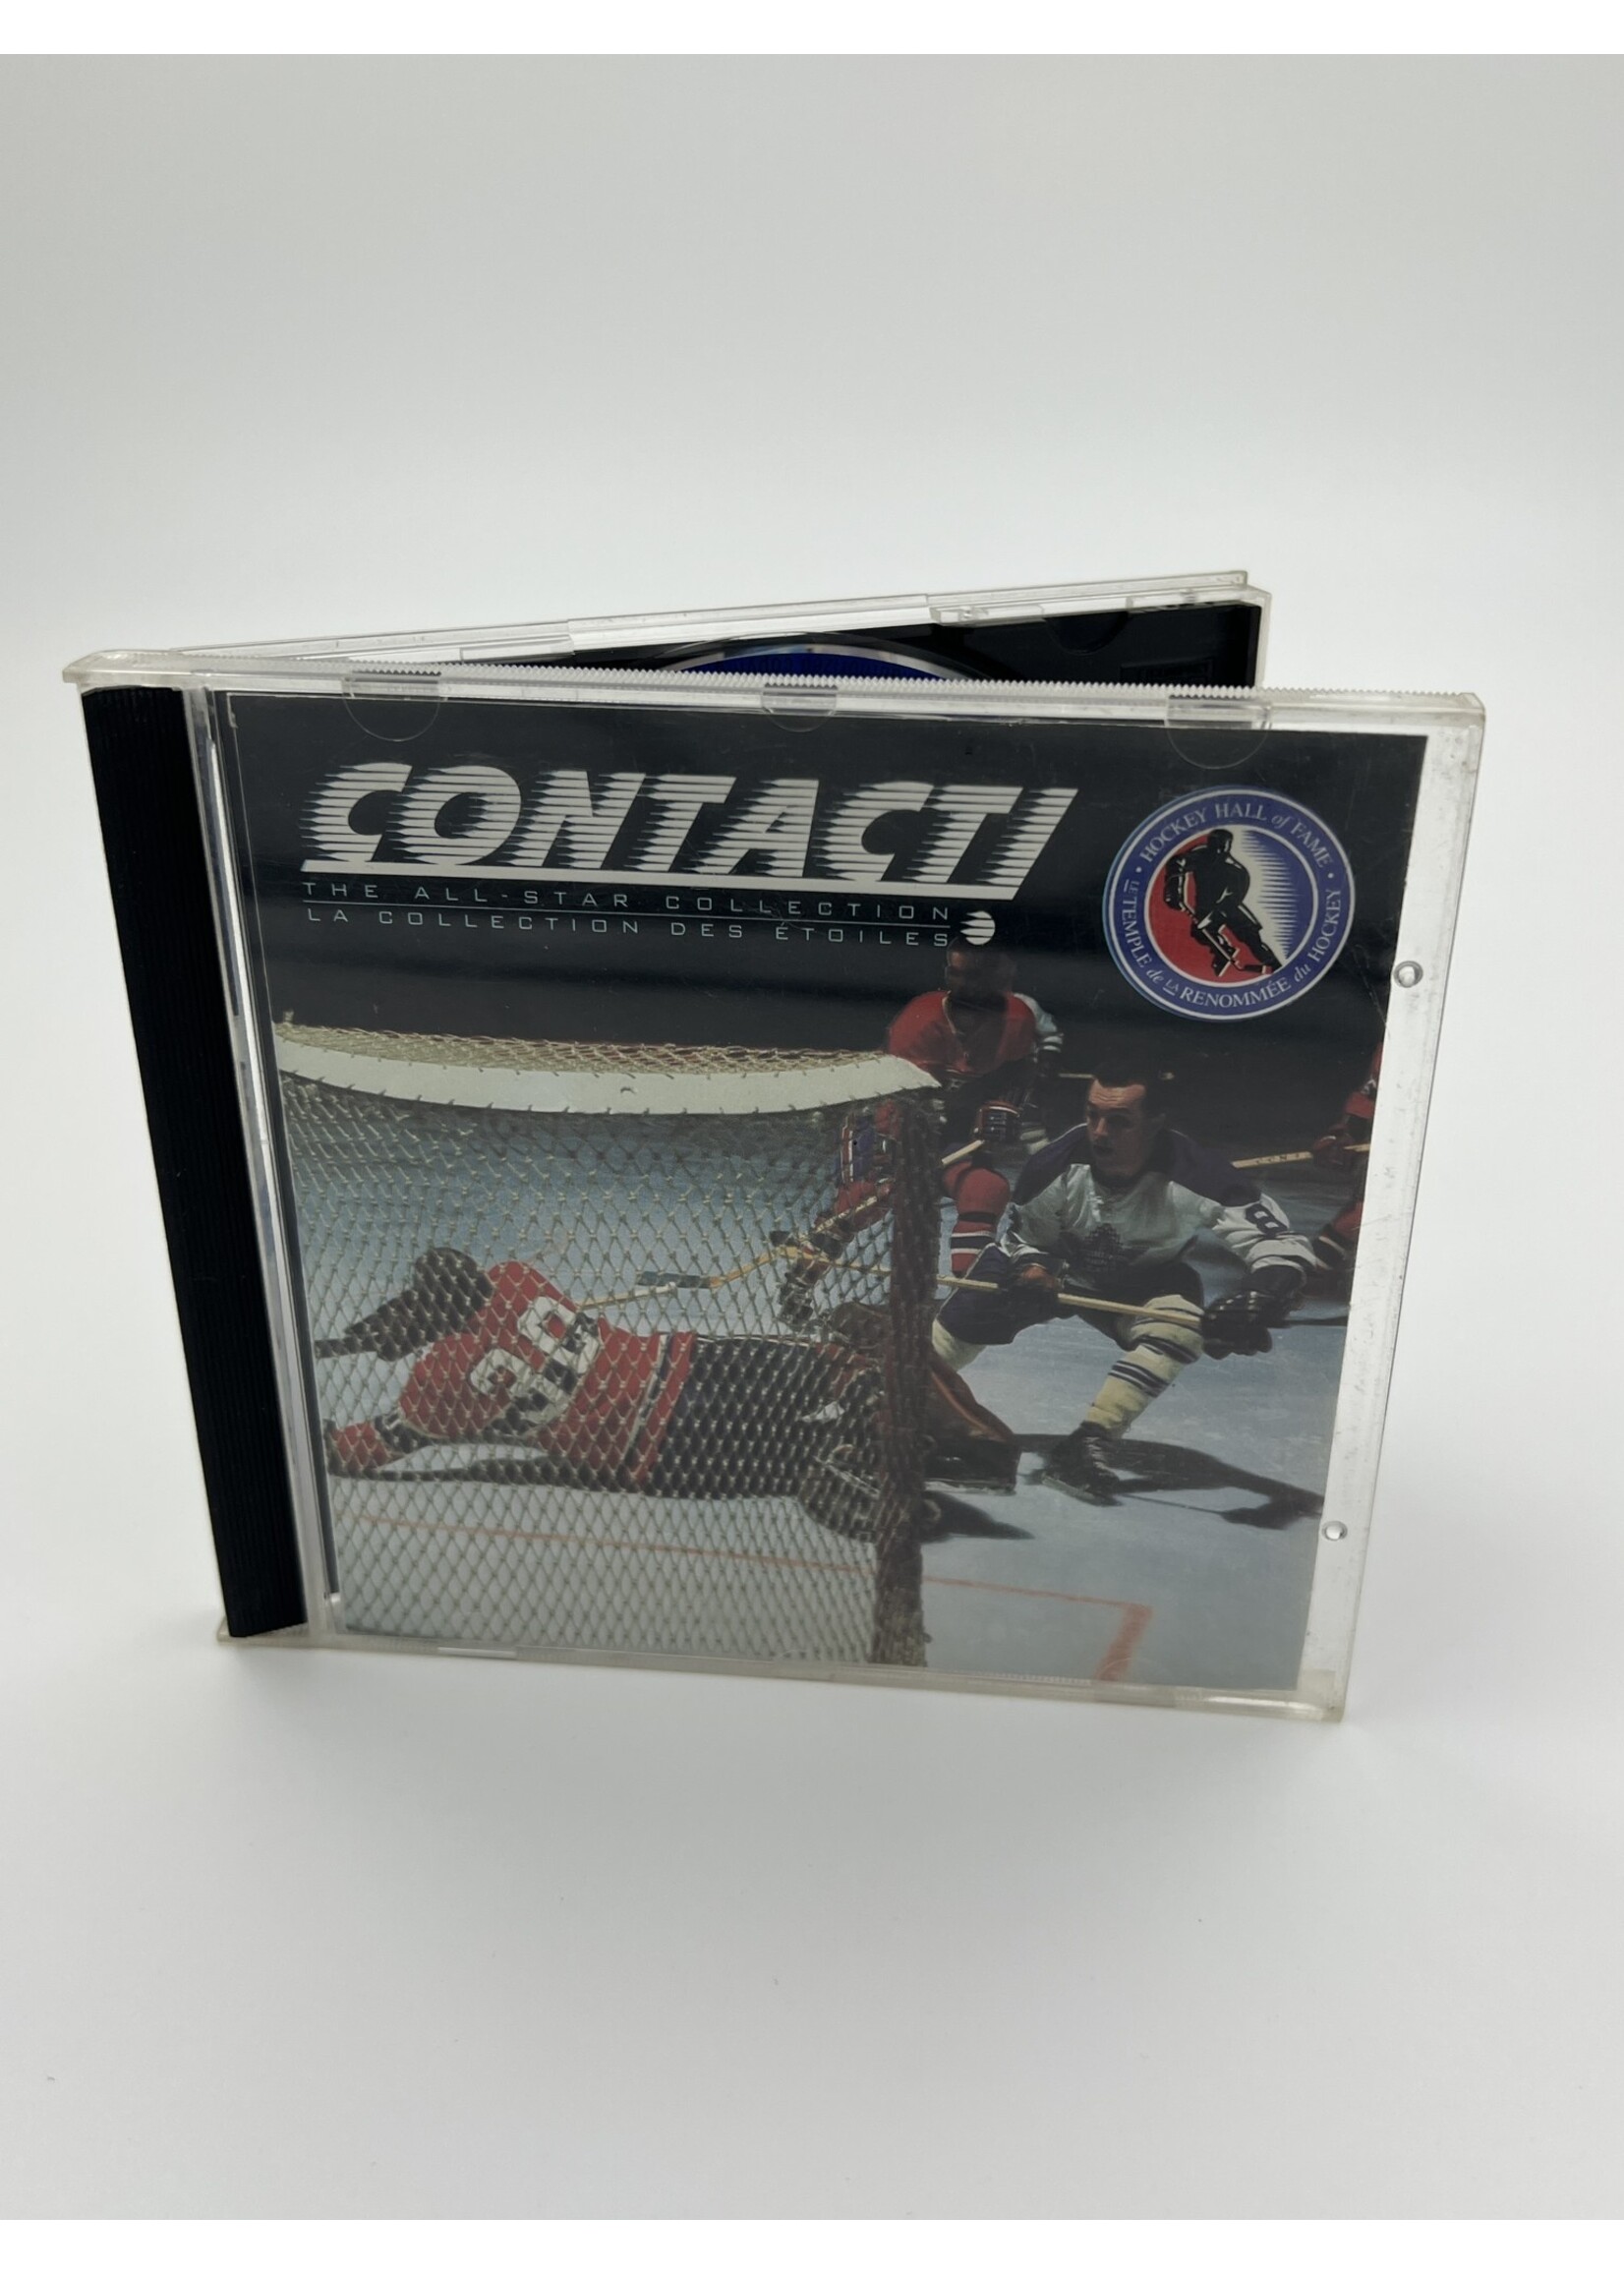 CD Contact The All Star Collection Various Artist CD